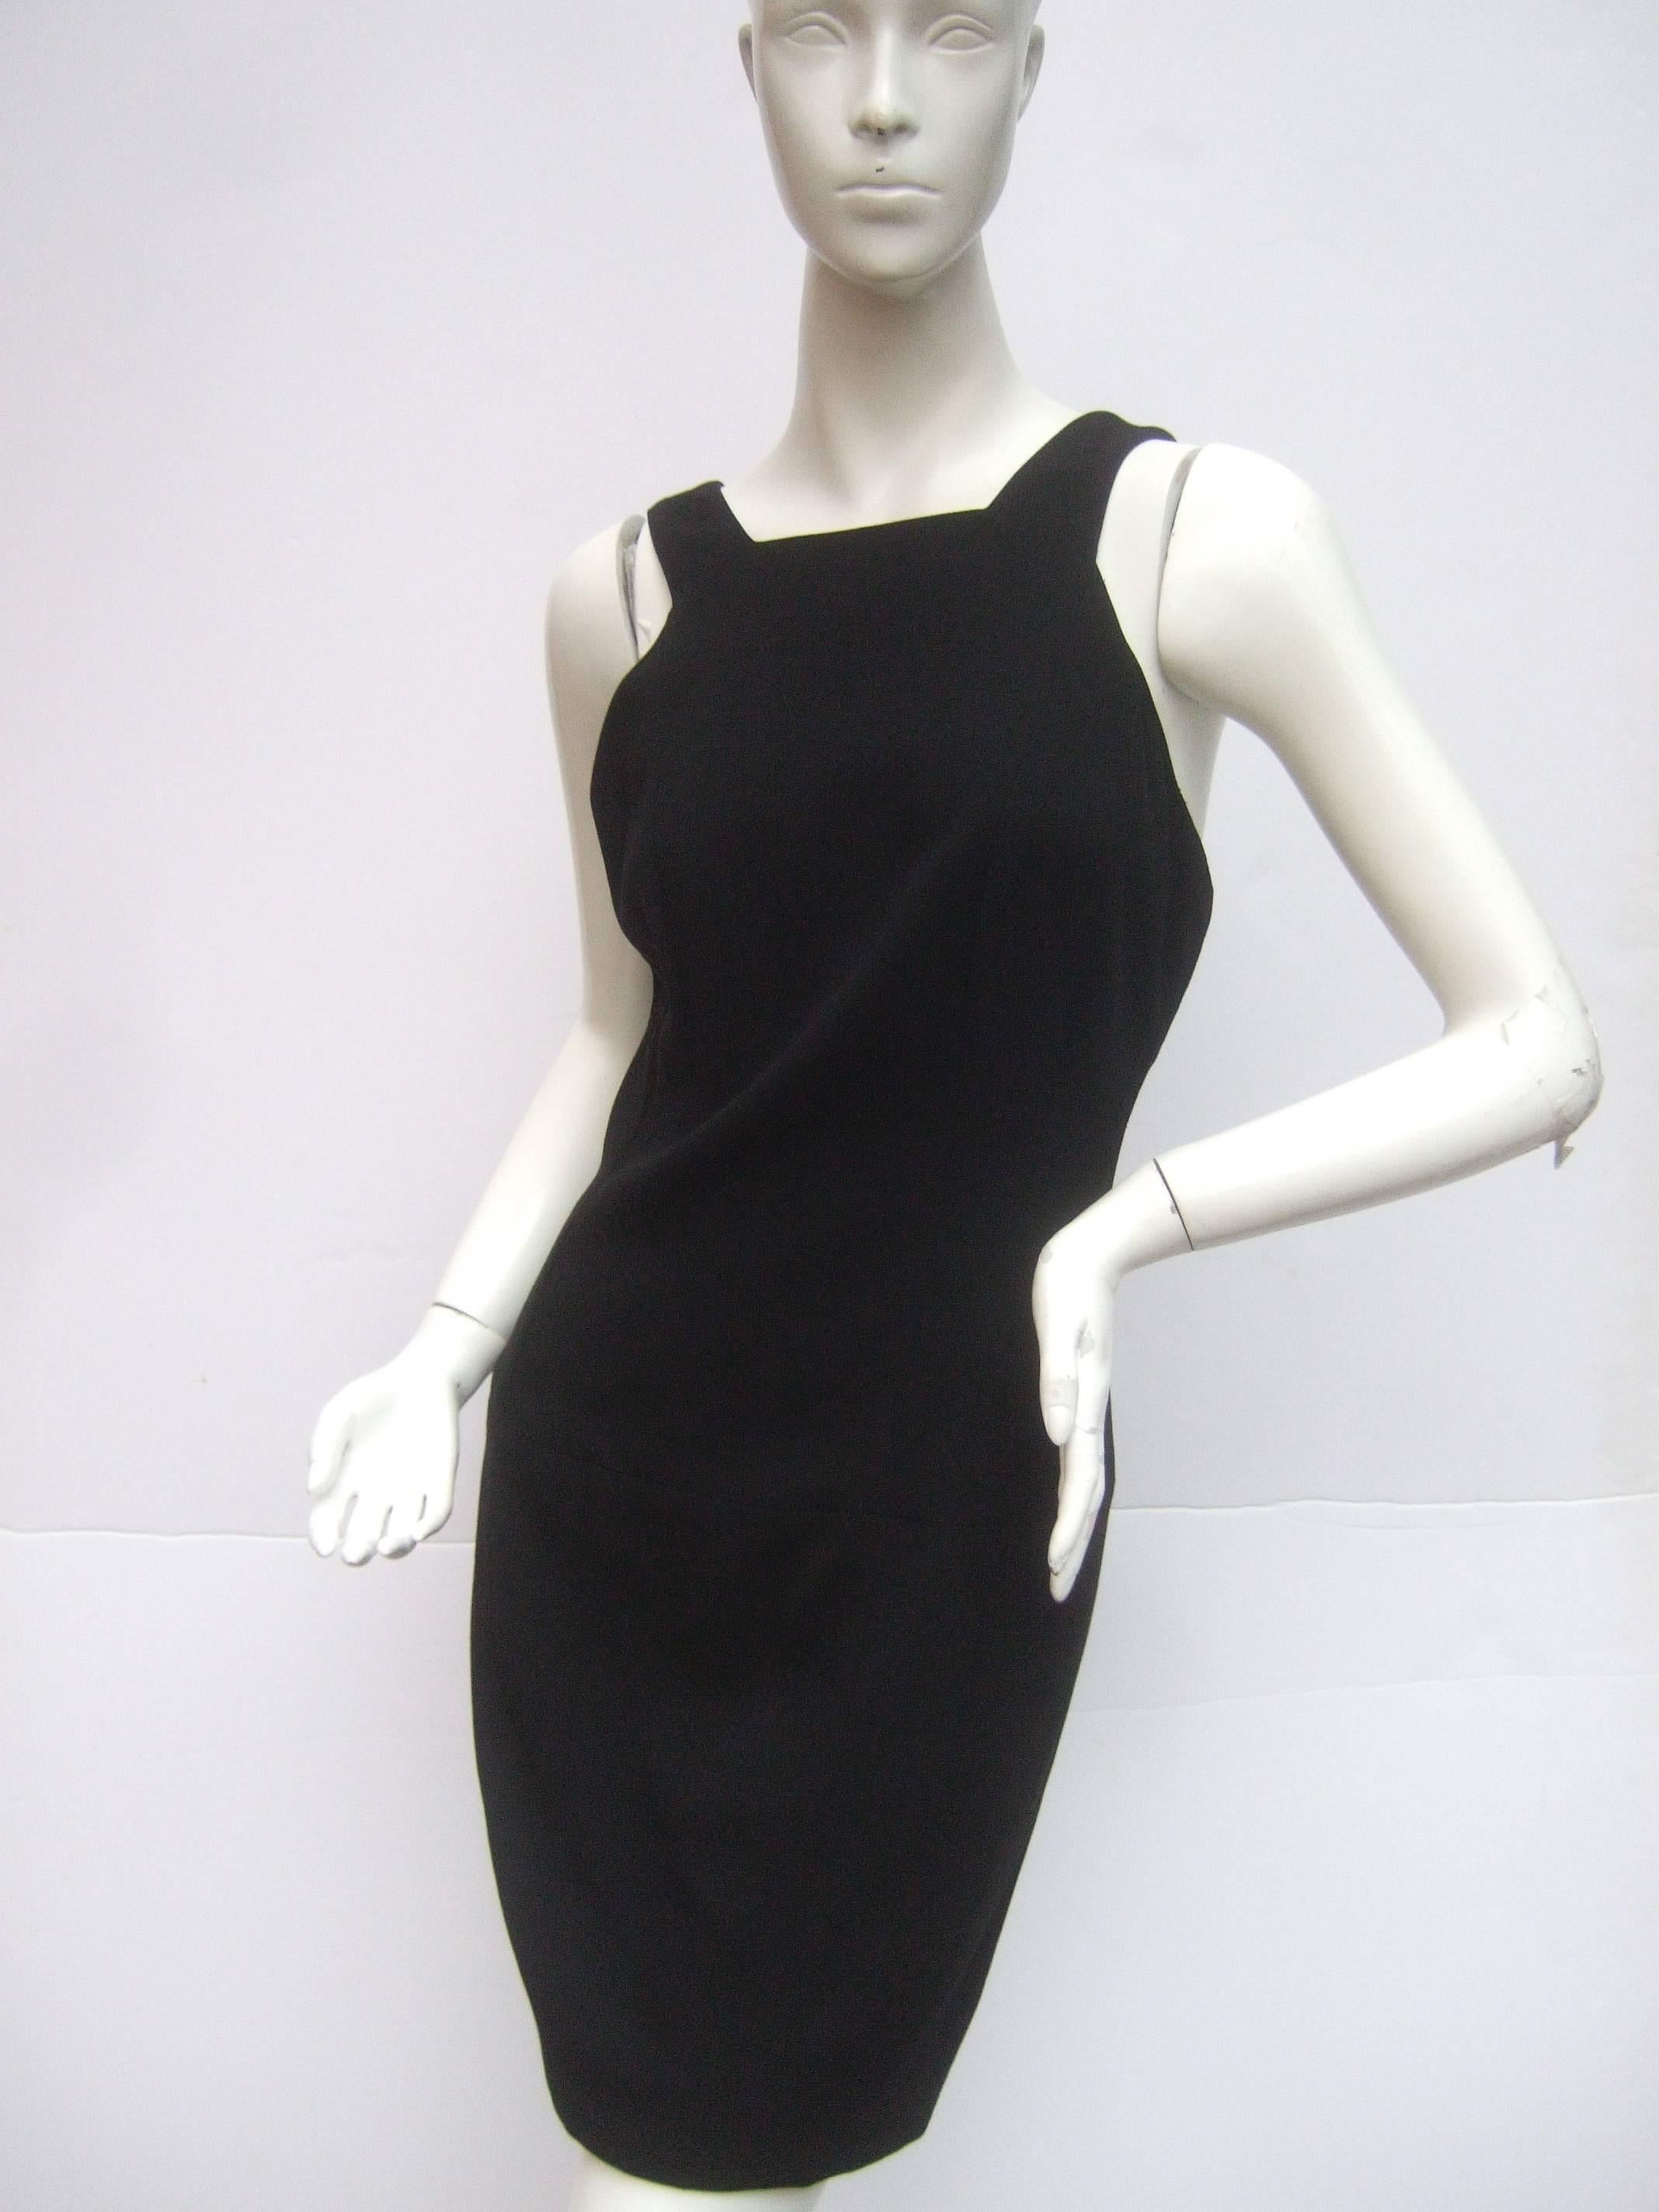 Chanel Boutique Chic black wool cocktail dress Size 42
The stylish high fashion dress is designed with shoulder
straps embellished with four black resin Chanel buttons

The Chanel buttons secure the shoulder straps
and are placed on the back